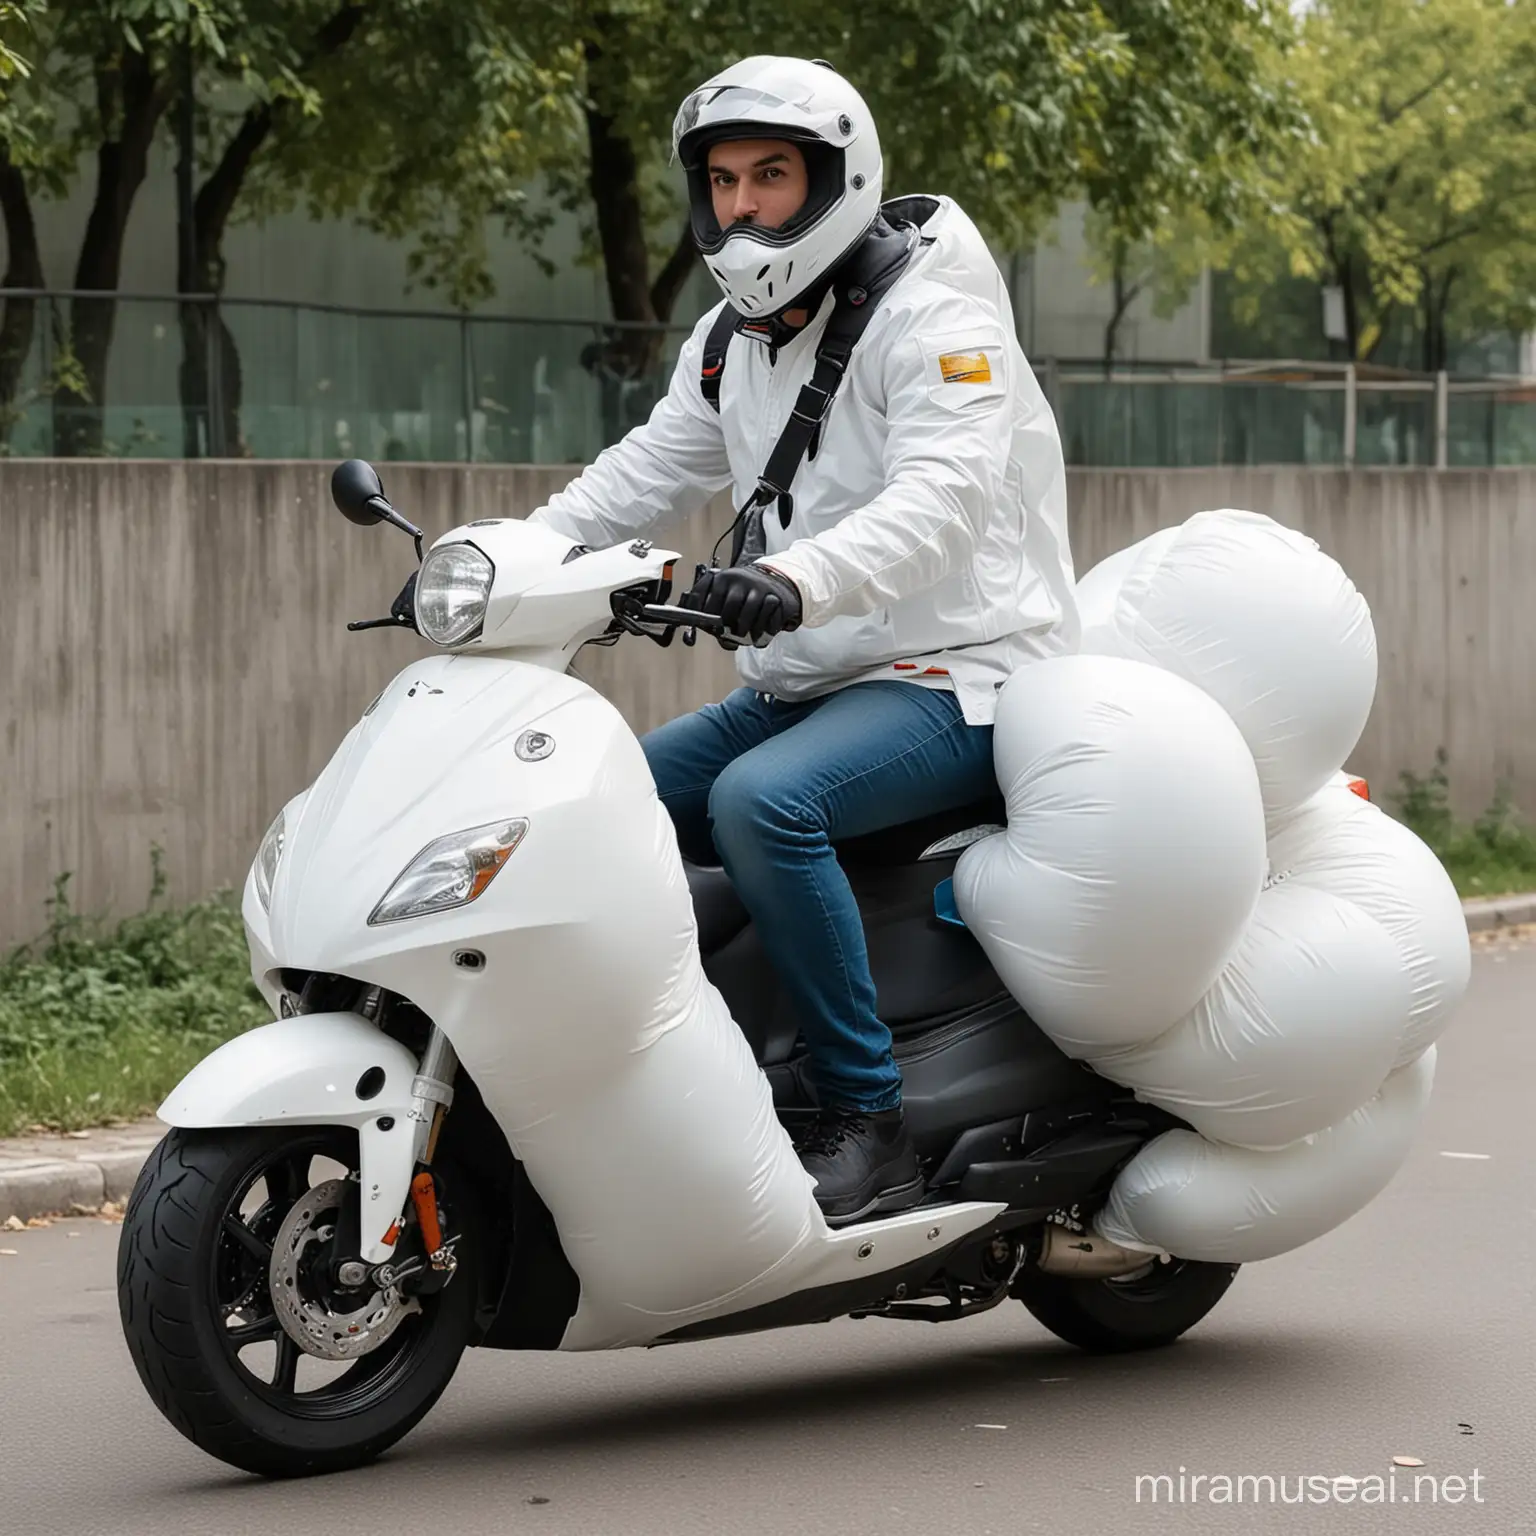 Scooter Riders FullBody Airbag Safety Suit